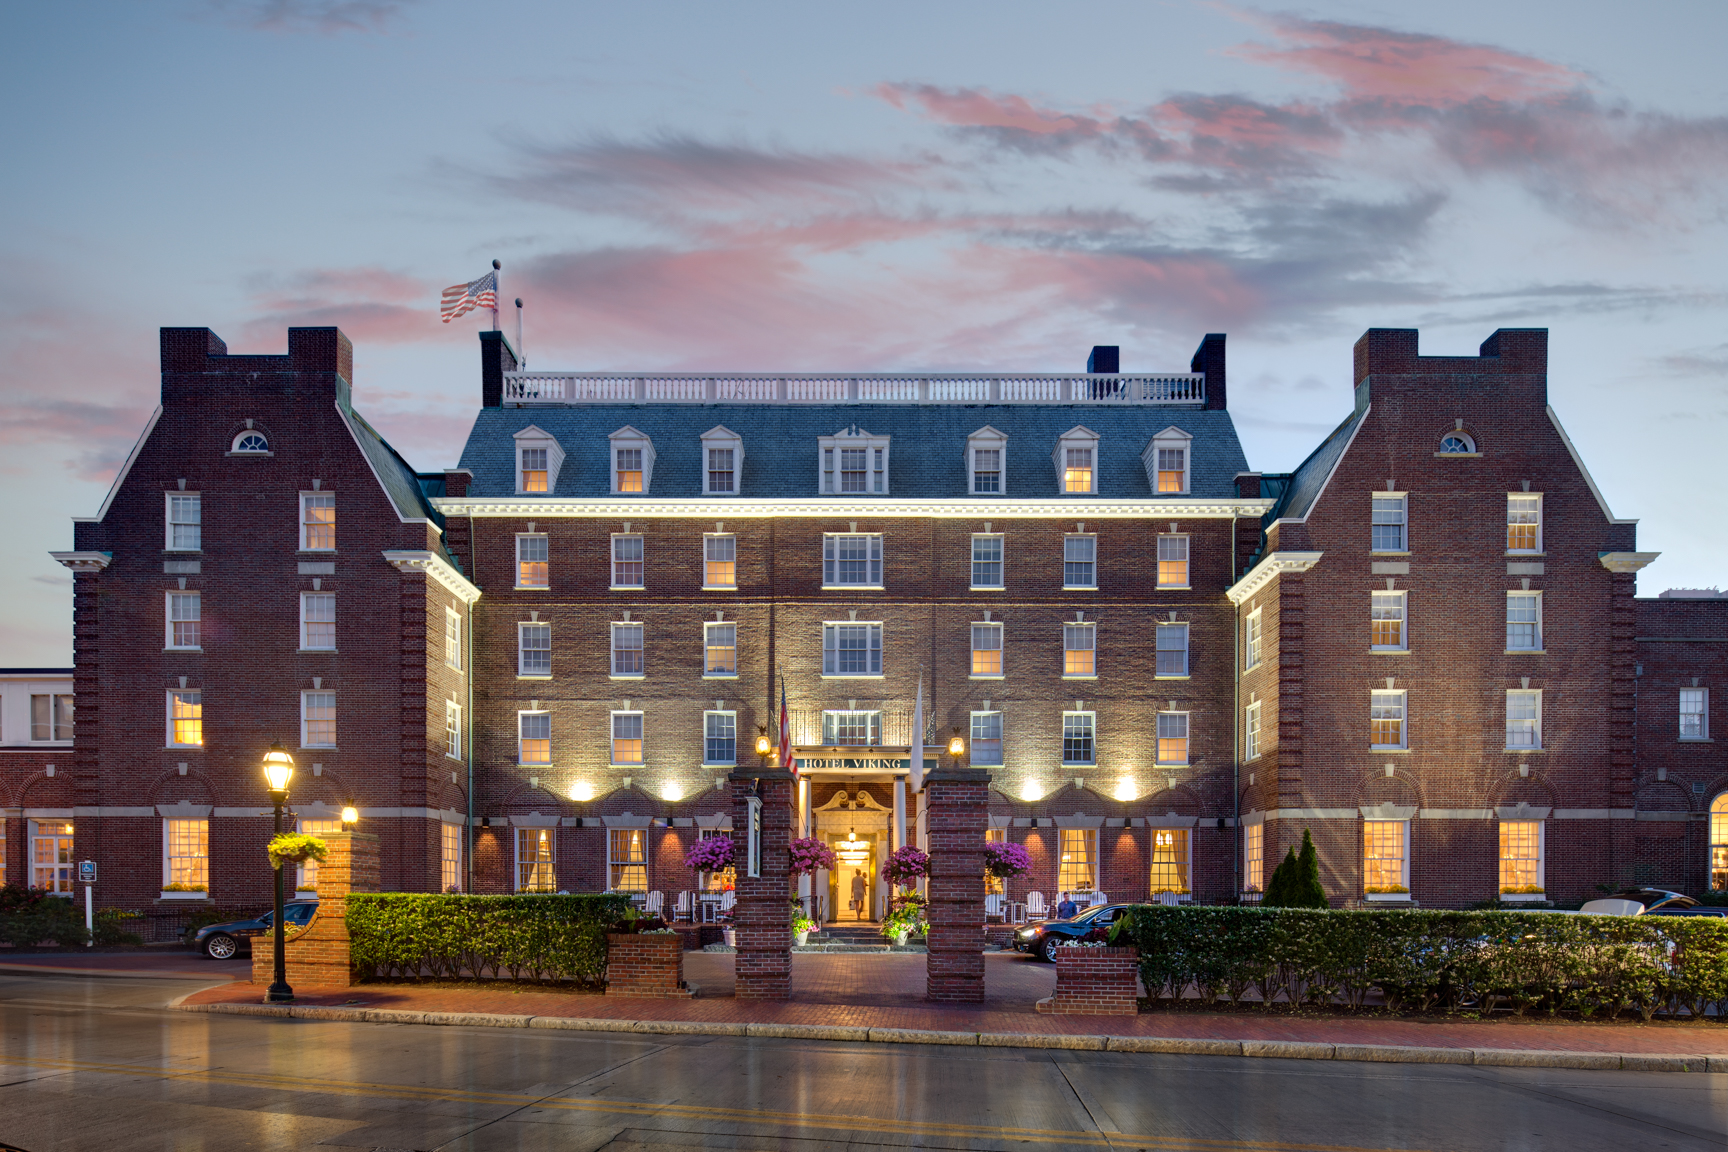 Hotel Viking, a member of the Historic Hotels of America, is located at One Bellevue Avenue in Newport, RI. Hotel Viking offers 208 elegantly appointed guest rooms and suites.